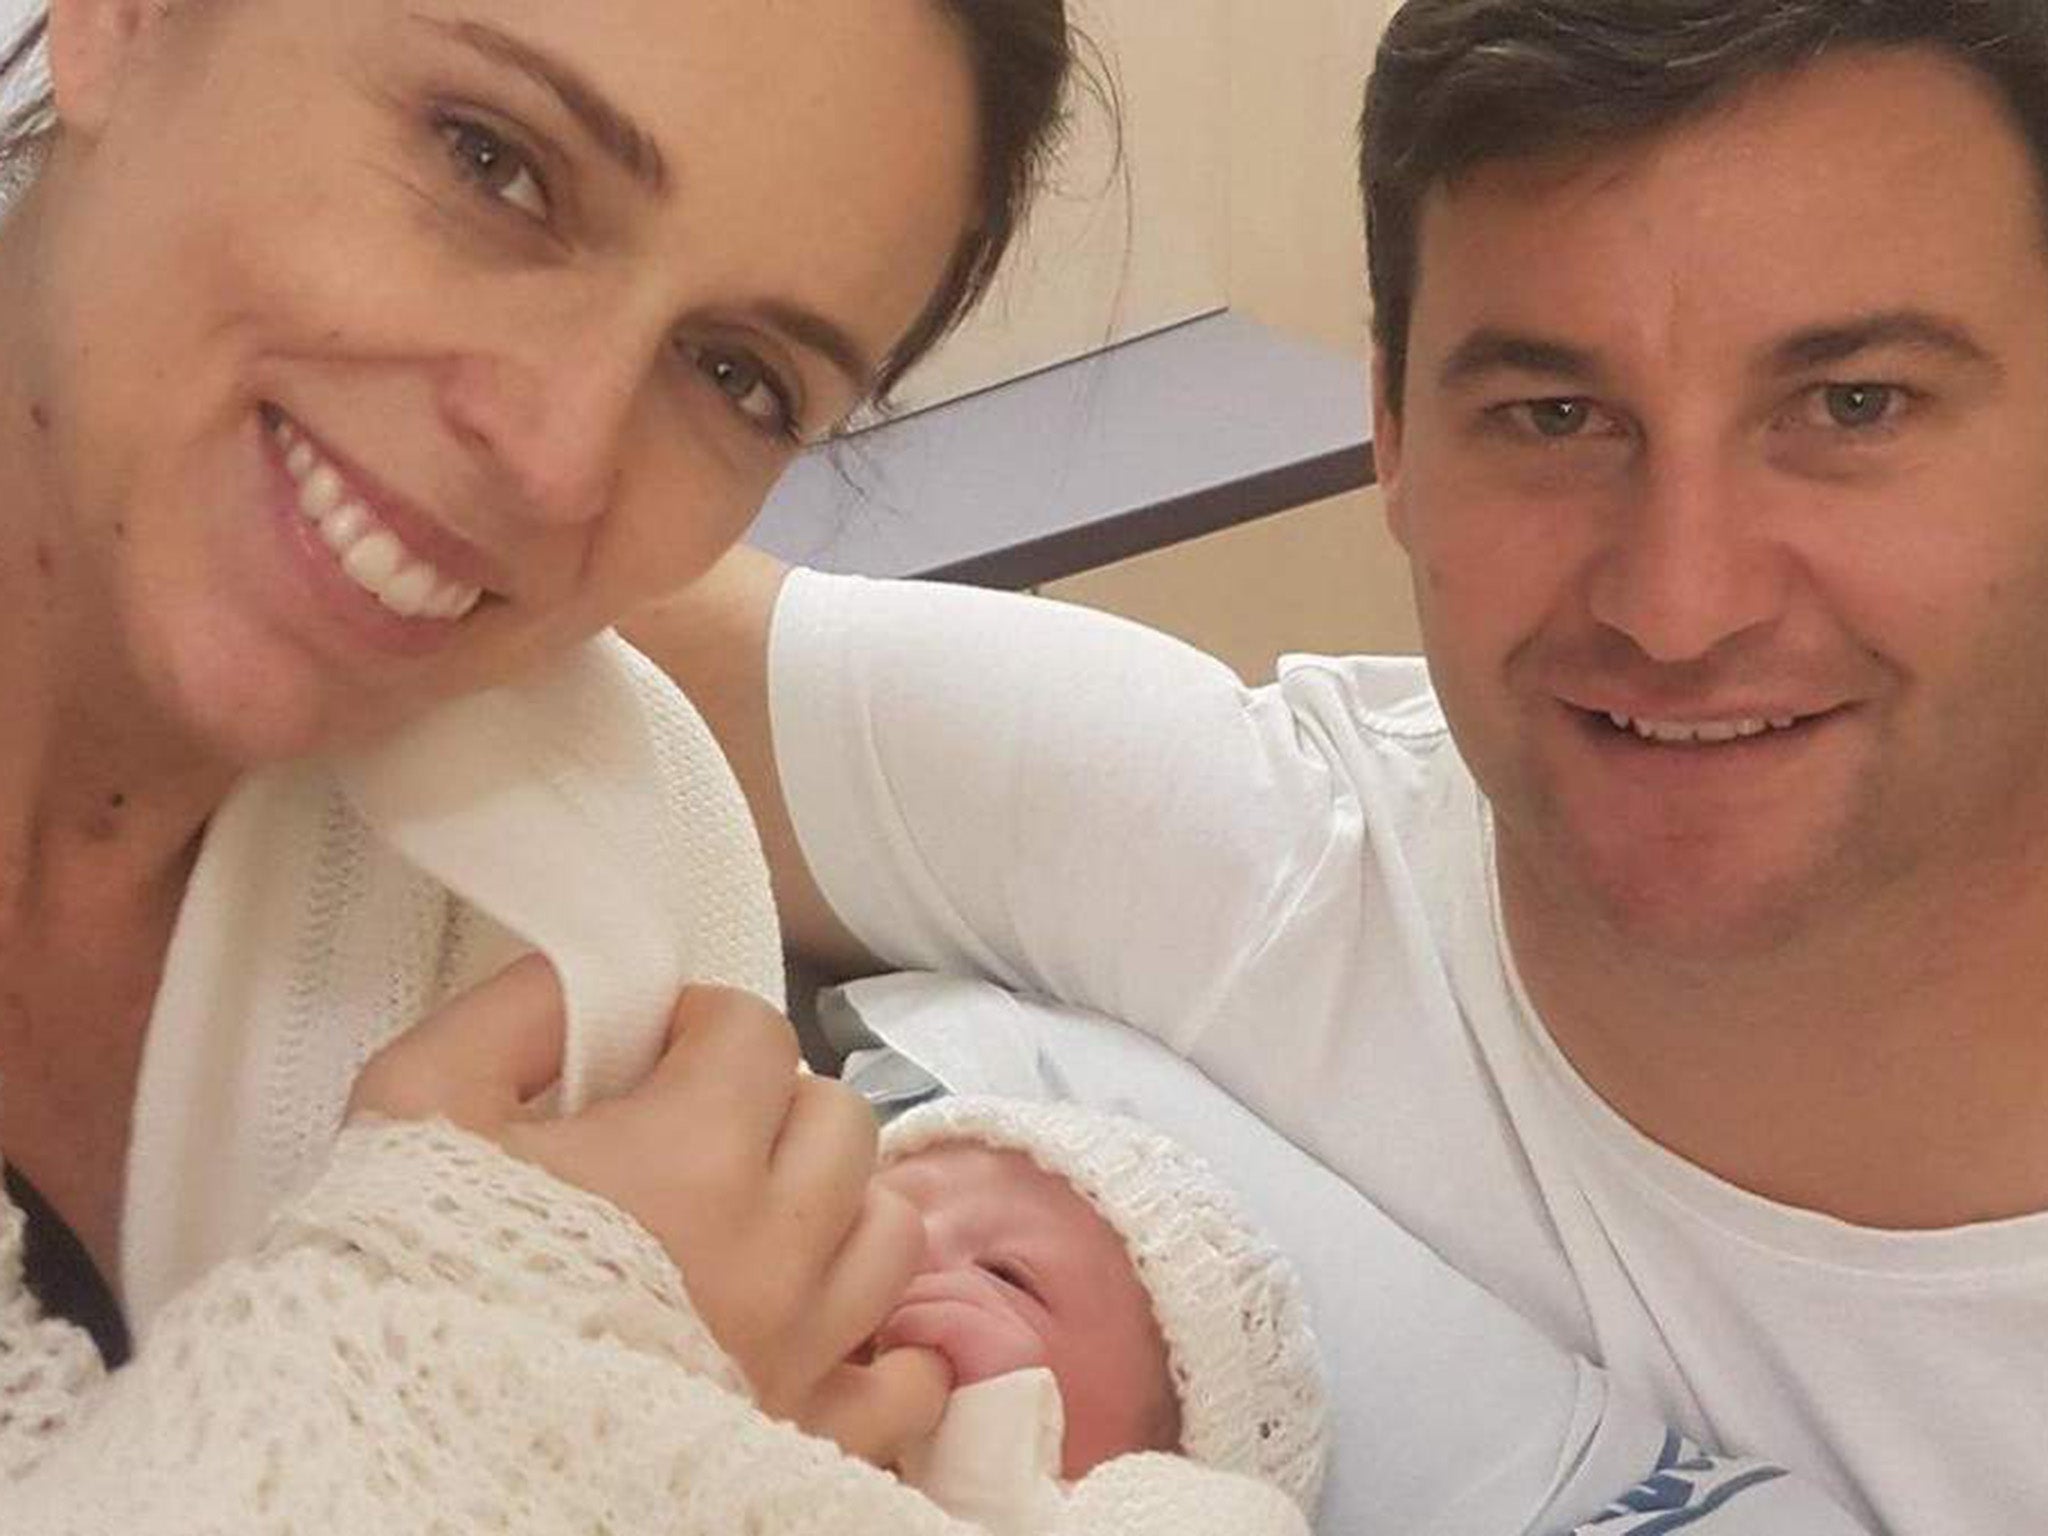 Jacinda Ardern baby: New Zealand Prime Minister gives birth to her first child